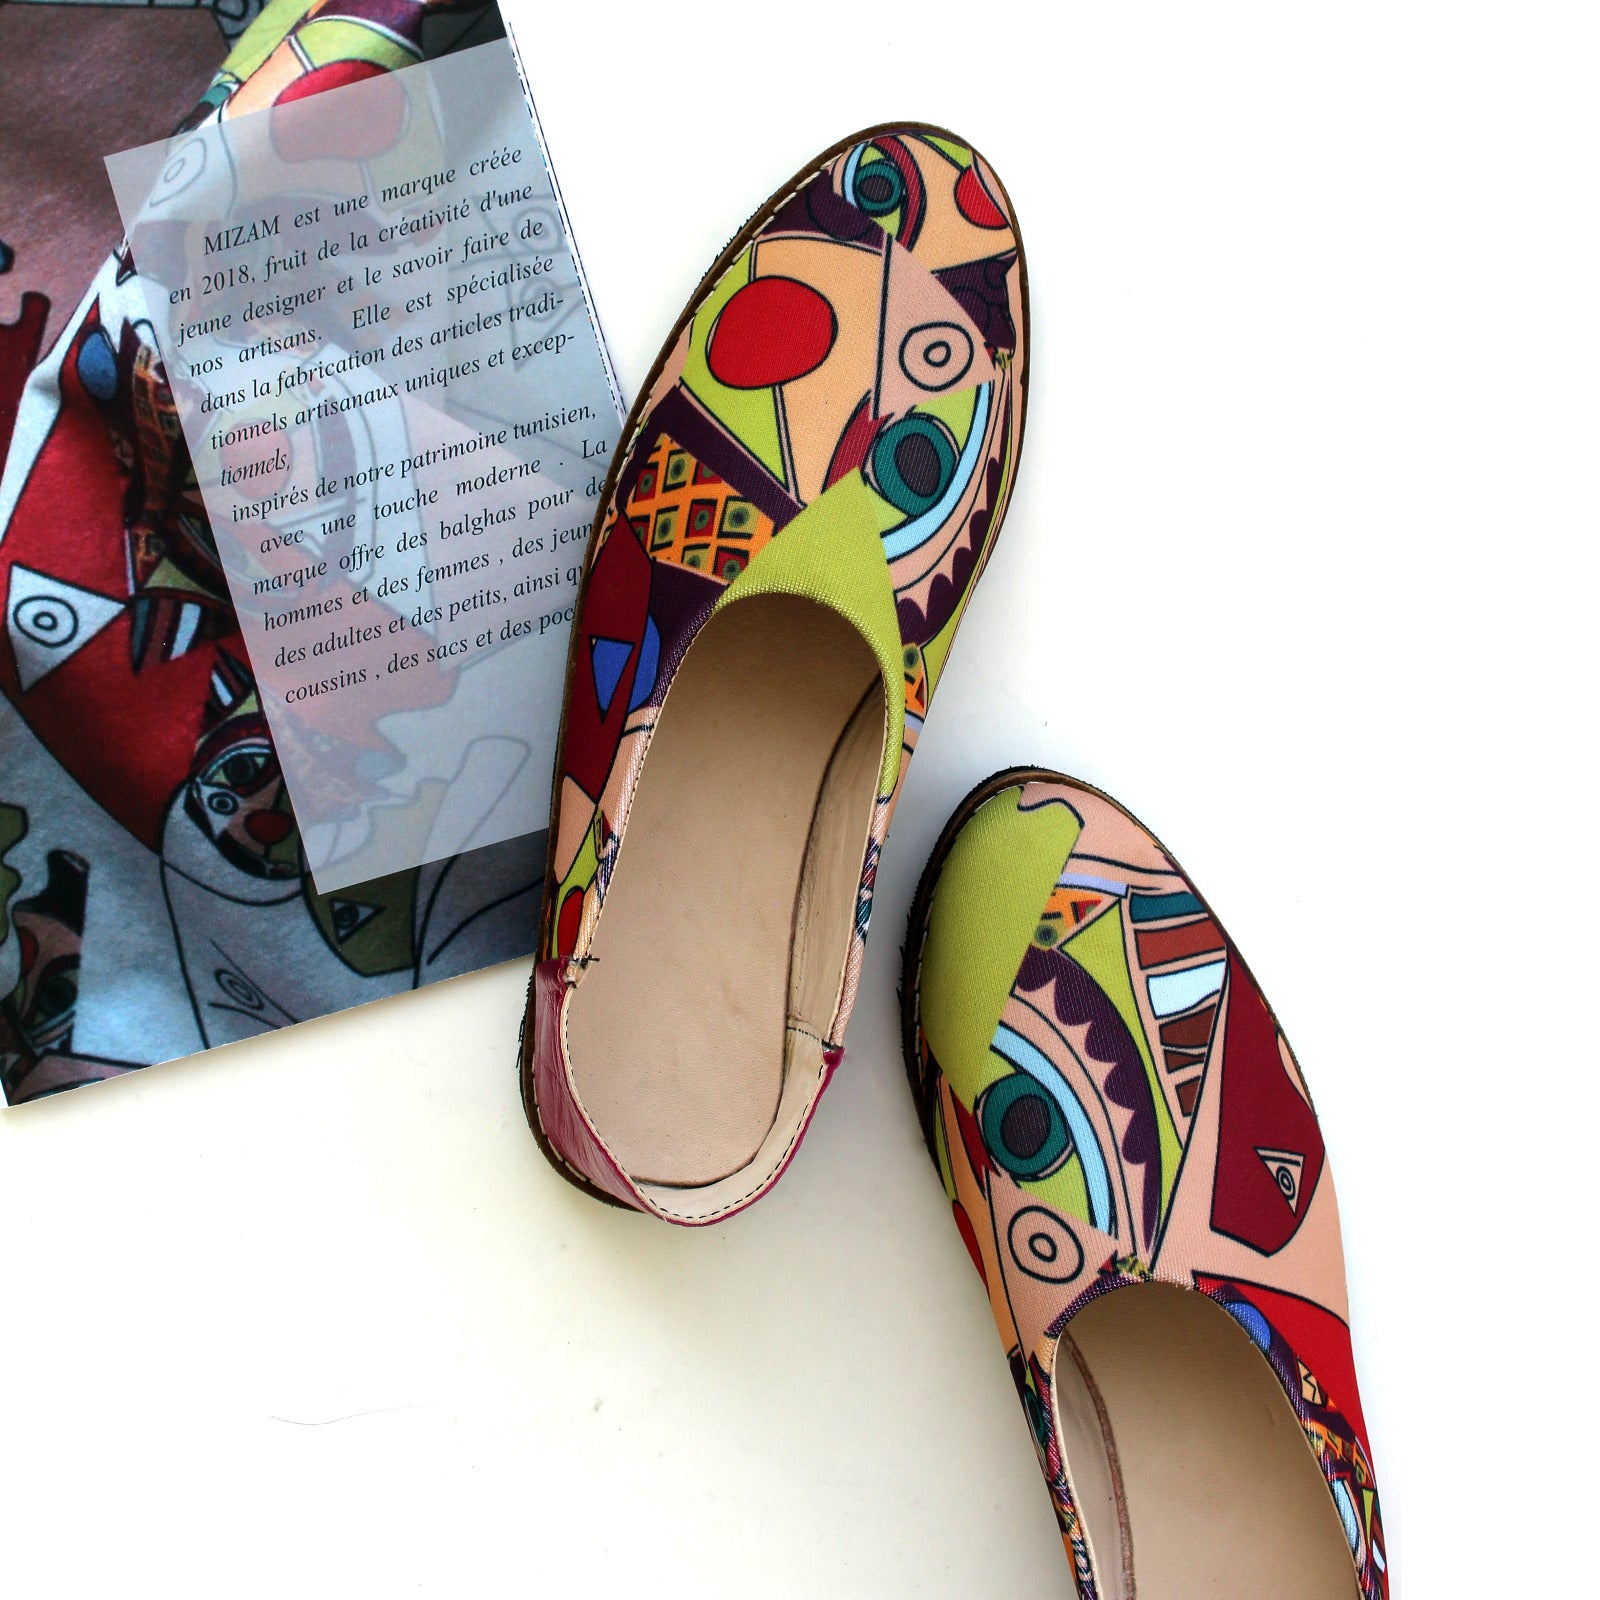 Fabric moccasin in traditional “IDDER” patterns